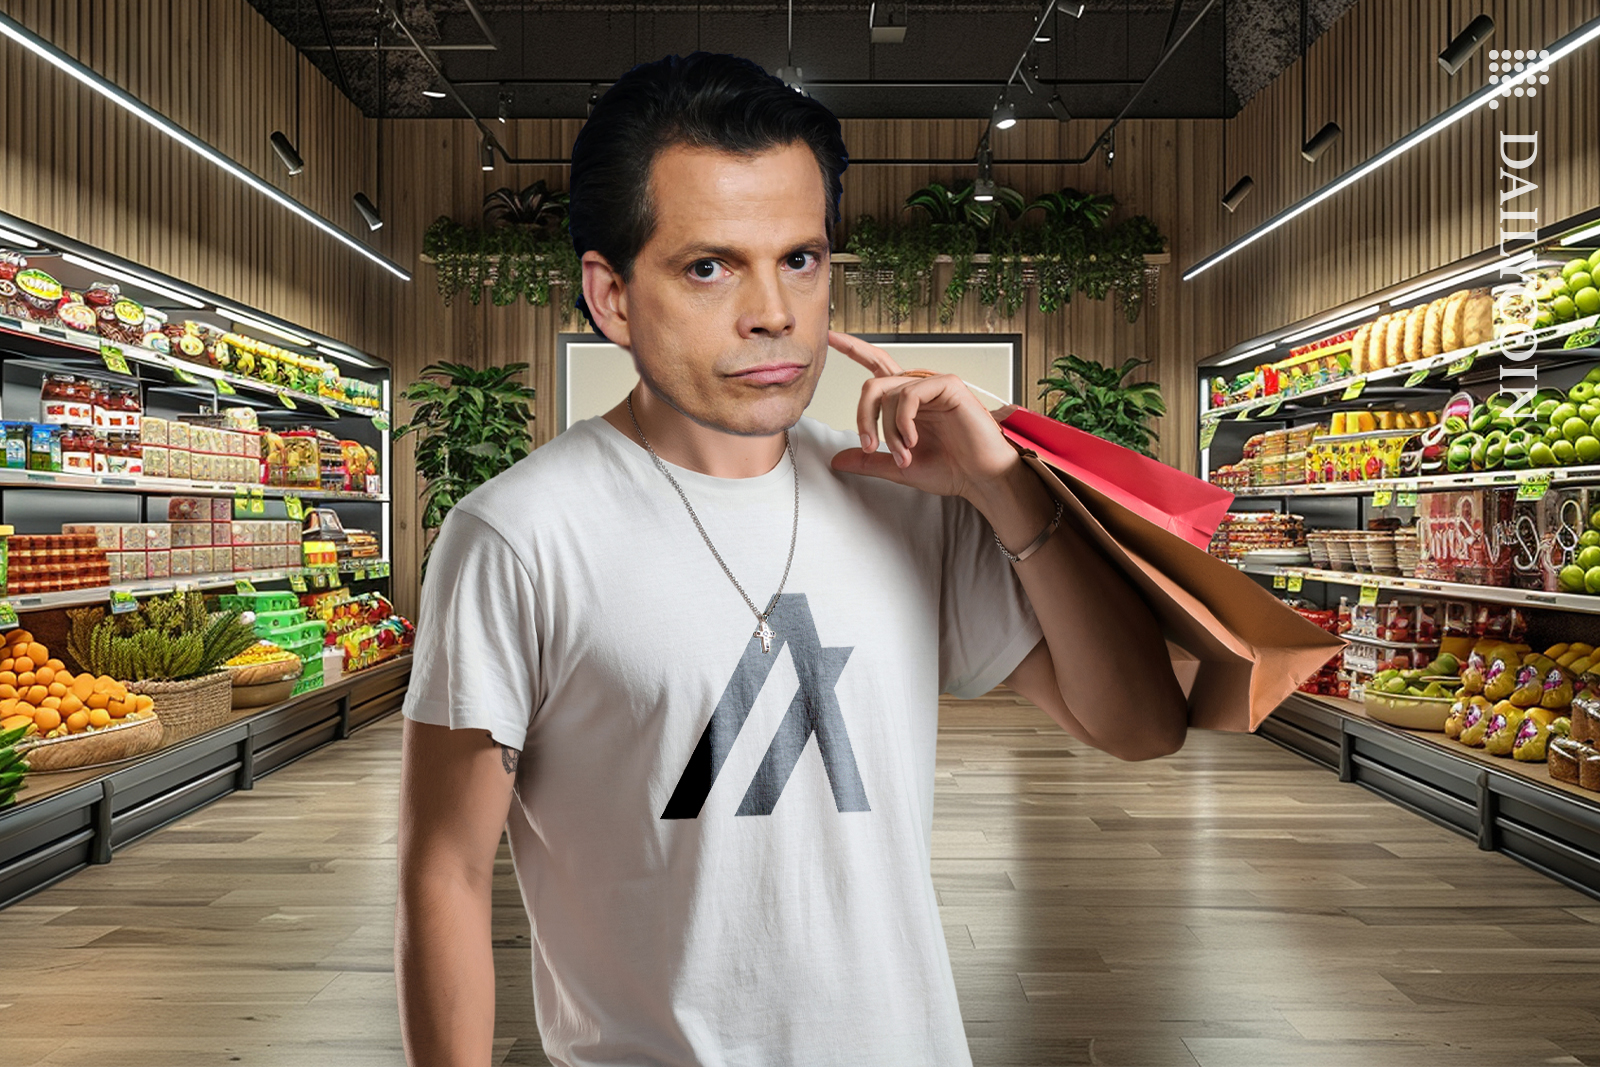 Anthony Scaramucci doing some grocery shopping wearing an Algorand t-shirt